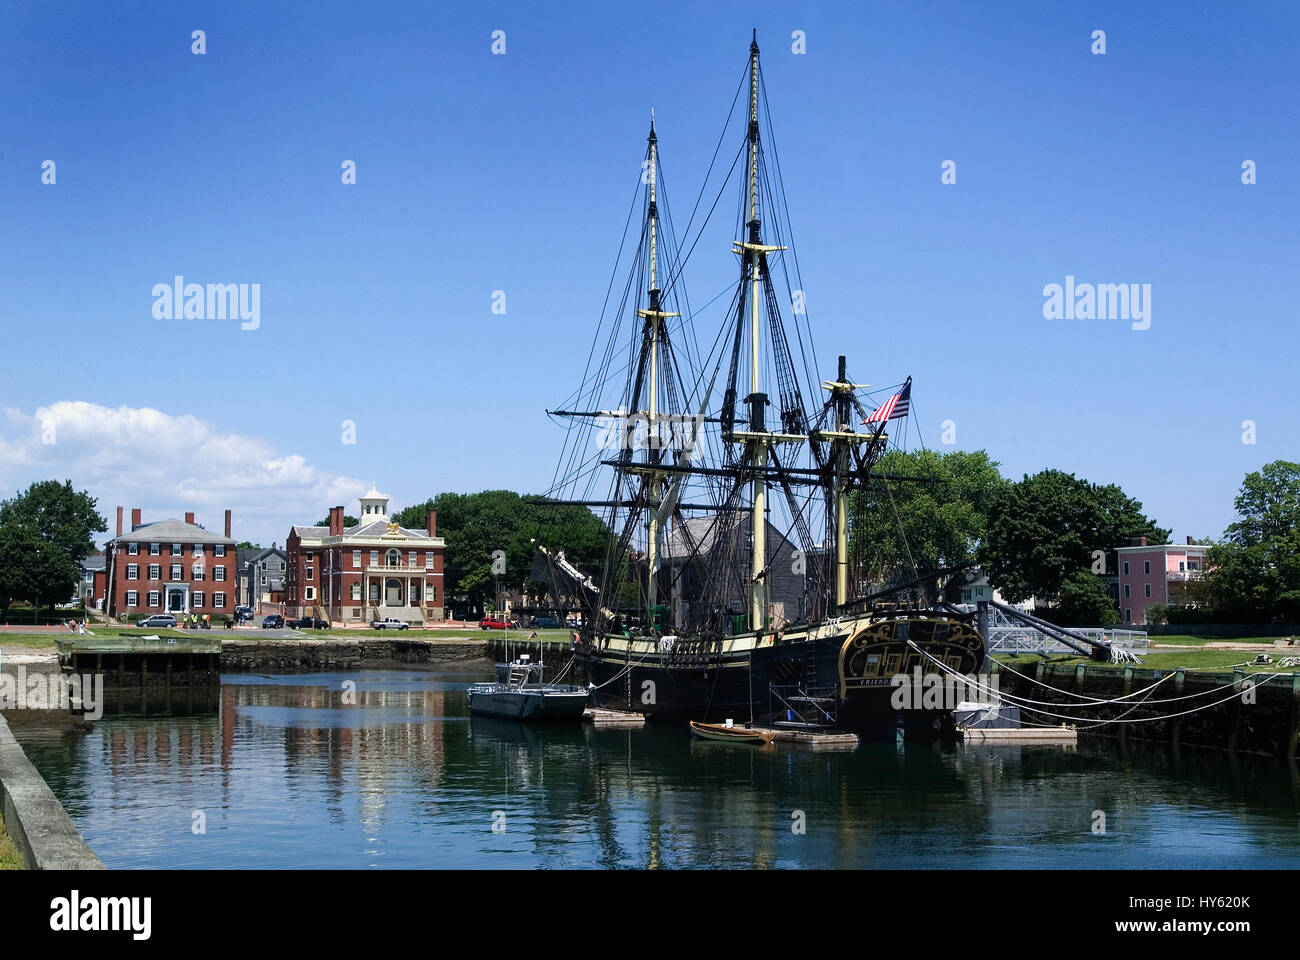 SALEM NATIONAL HISTORIC SITE - The 'Friendship of Salem' at the pier  The Friendship of Salem is a 171-foot replica of a 1797 East Indiaman, built in  Stock Photo